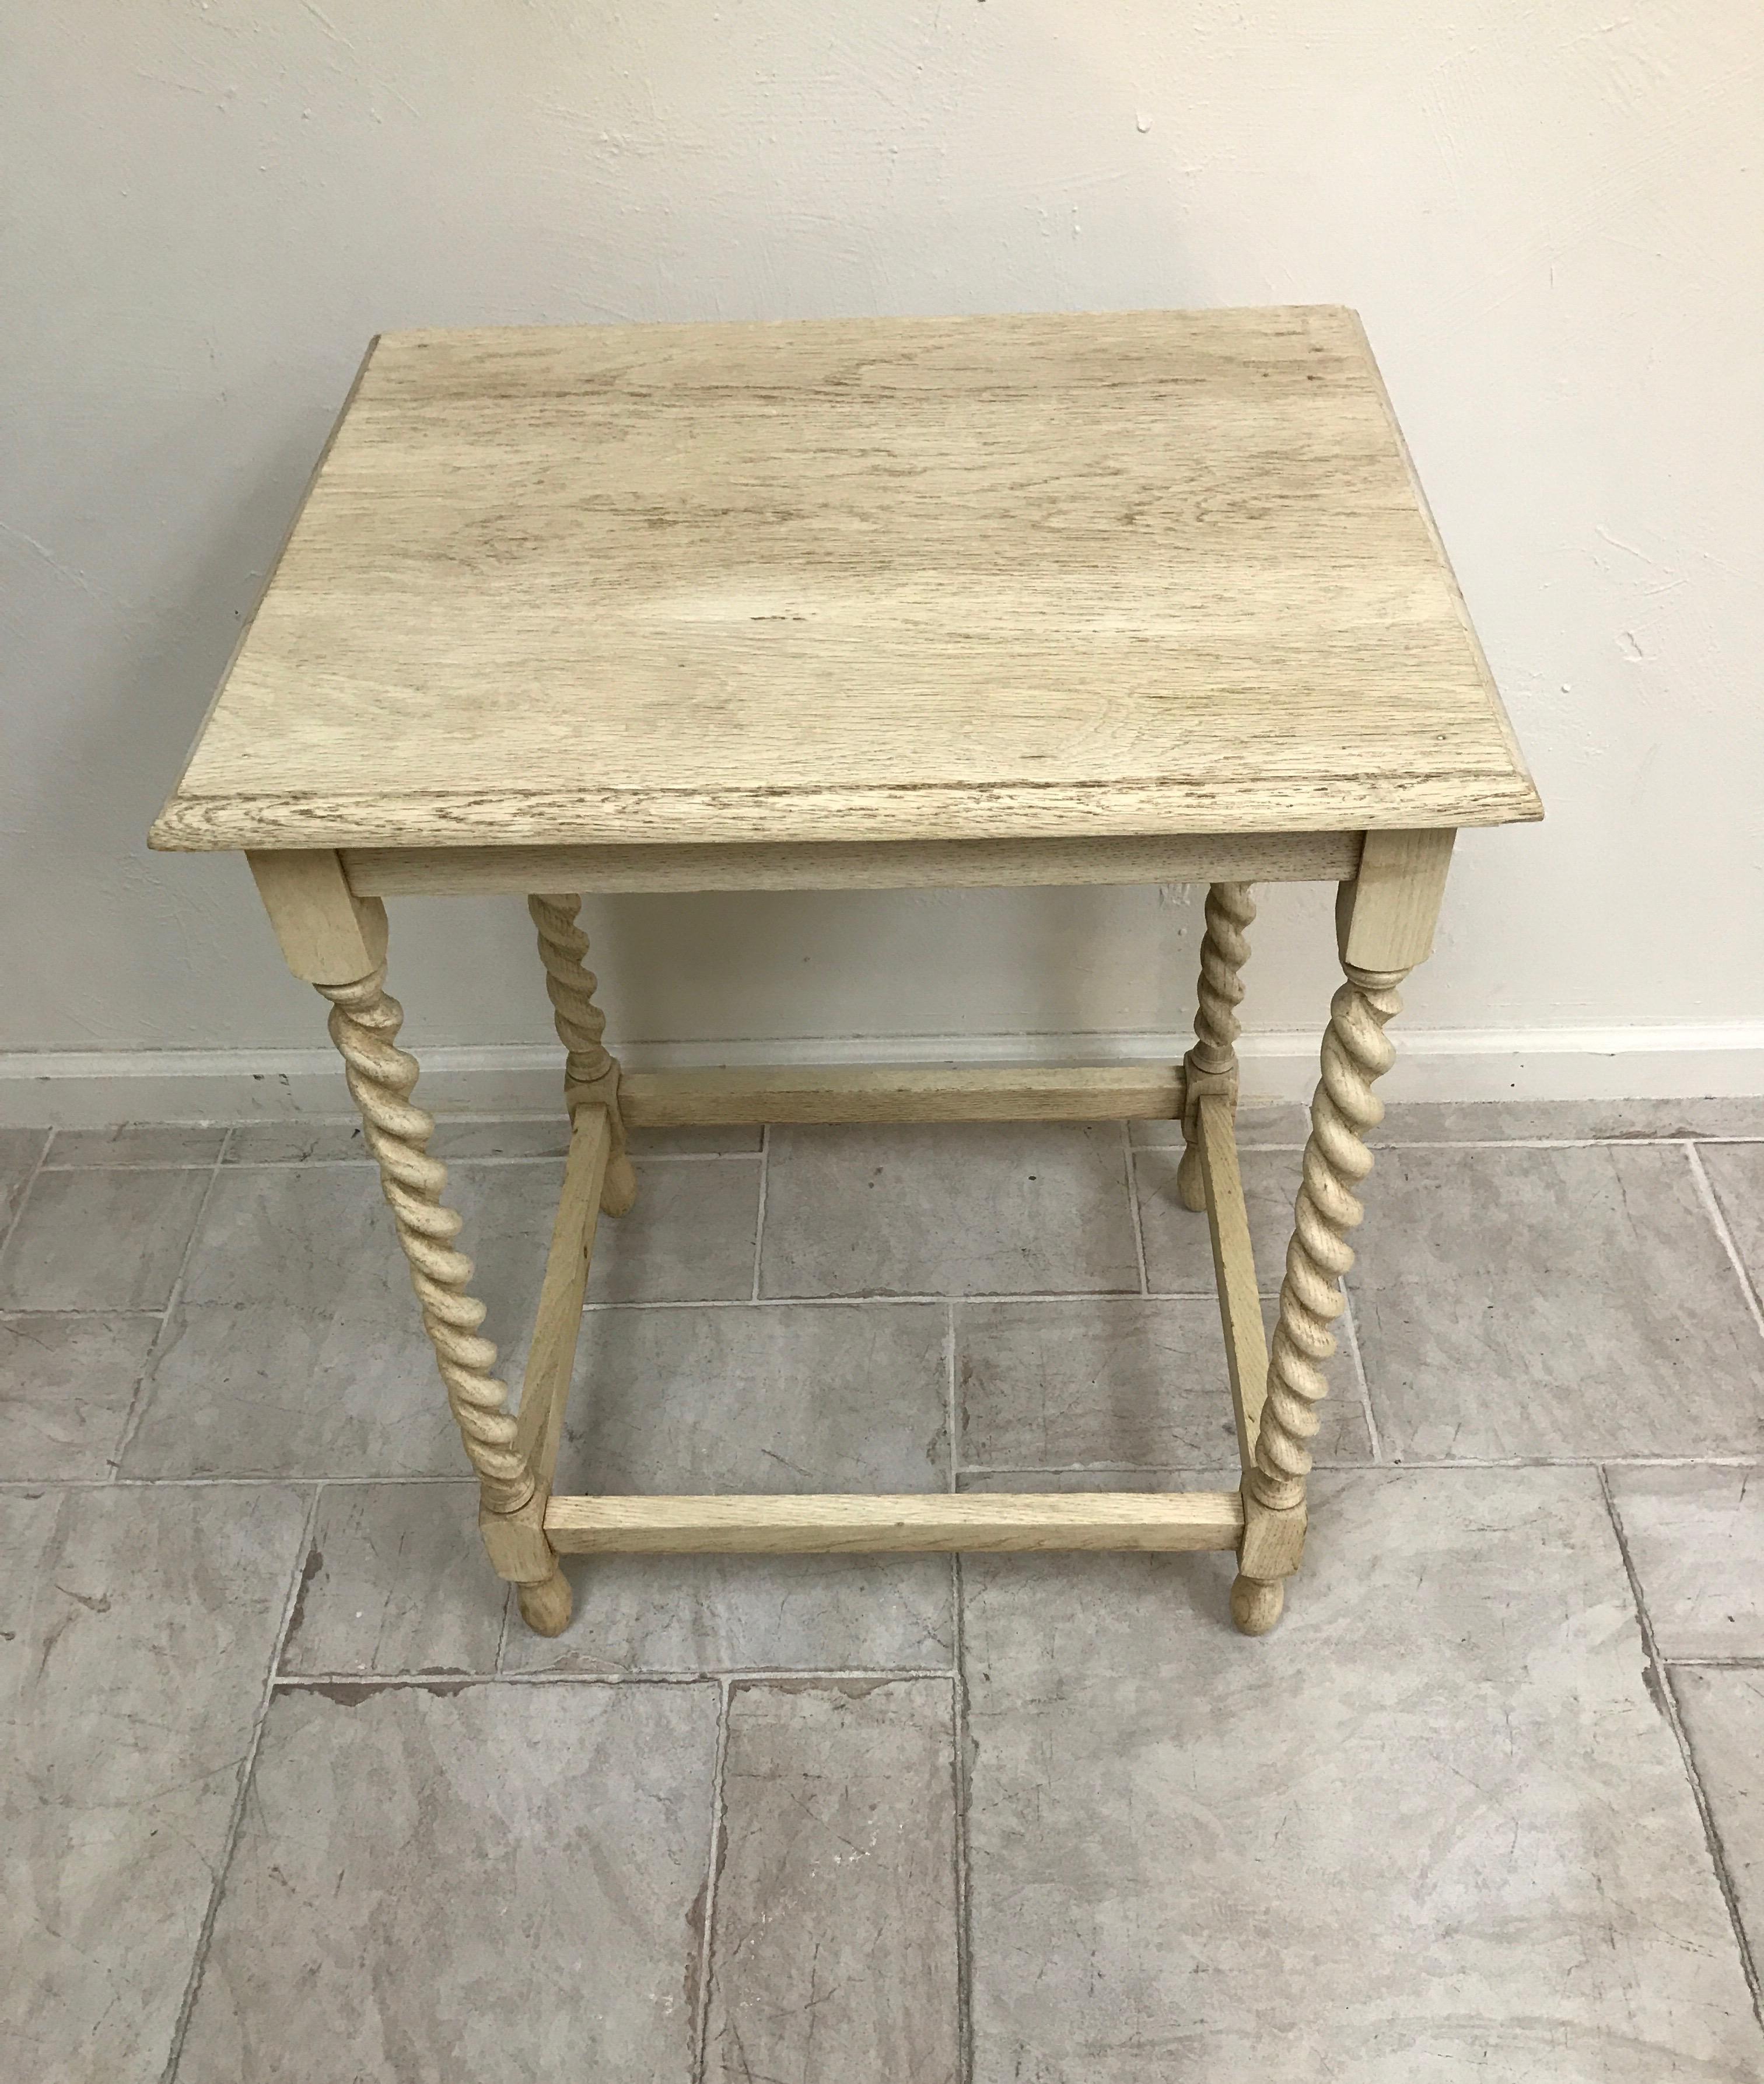 Bleached oak side table with barley twist legs and lower bottom stretchers.